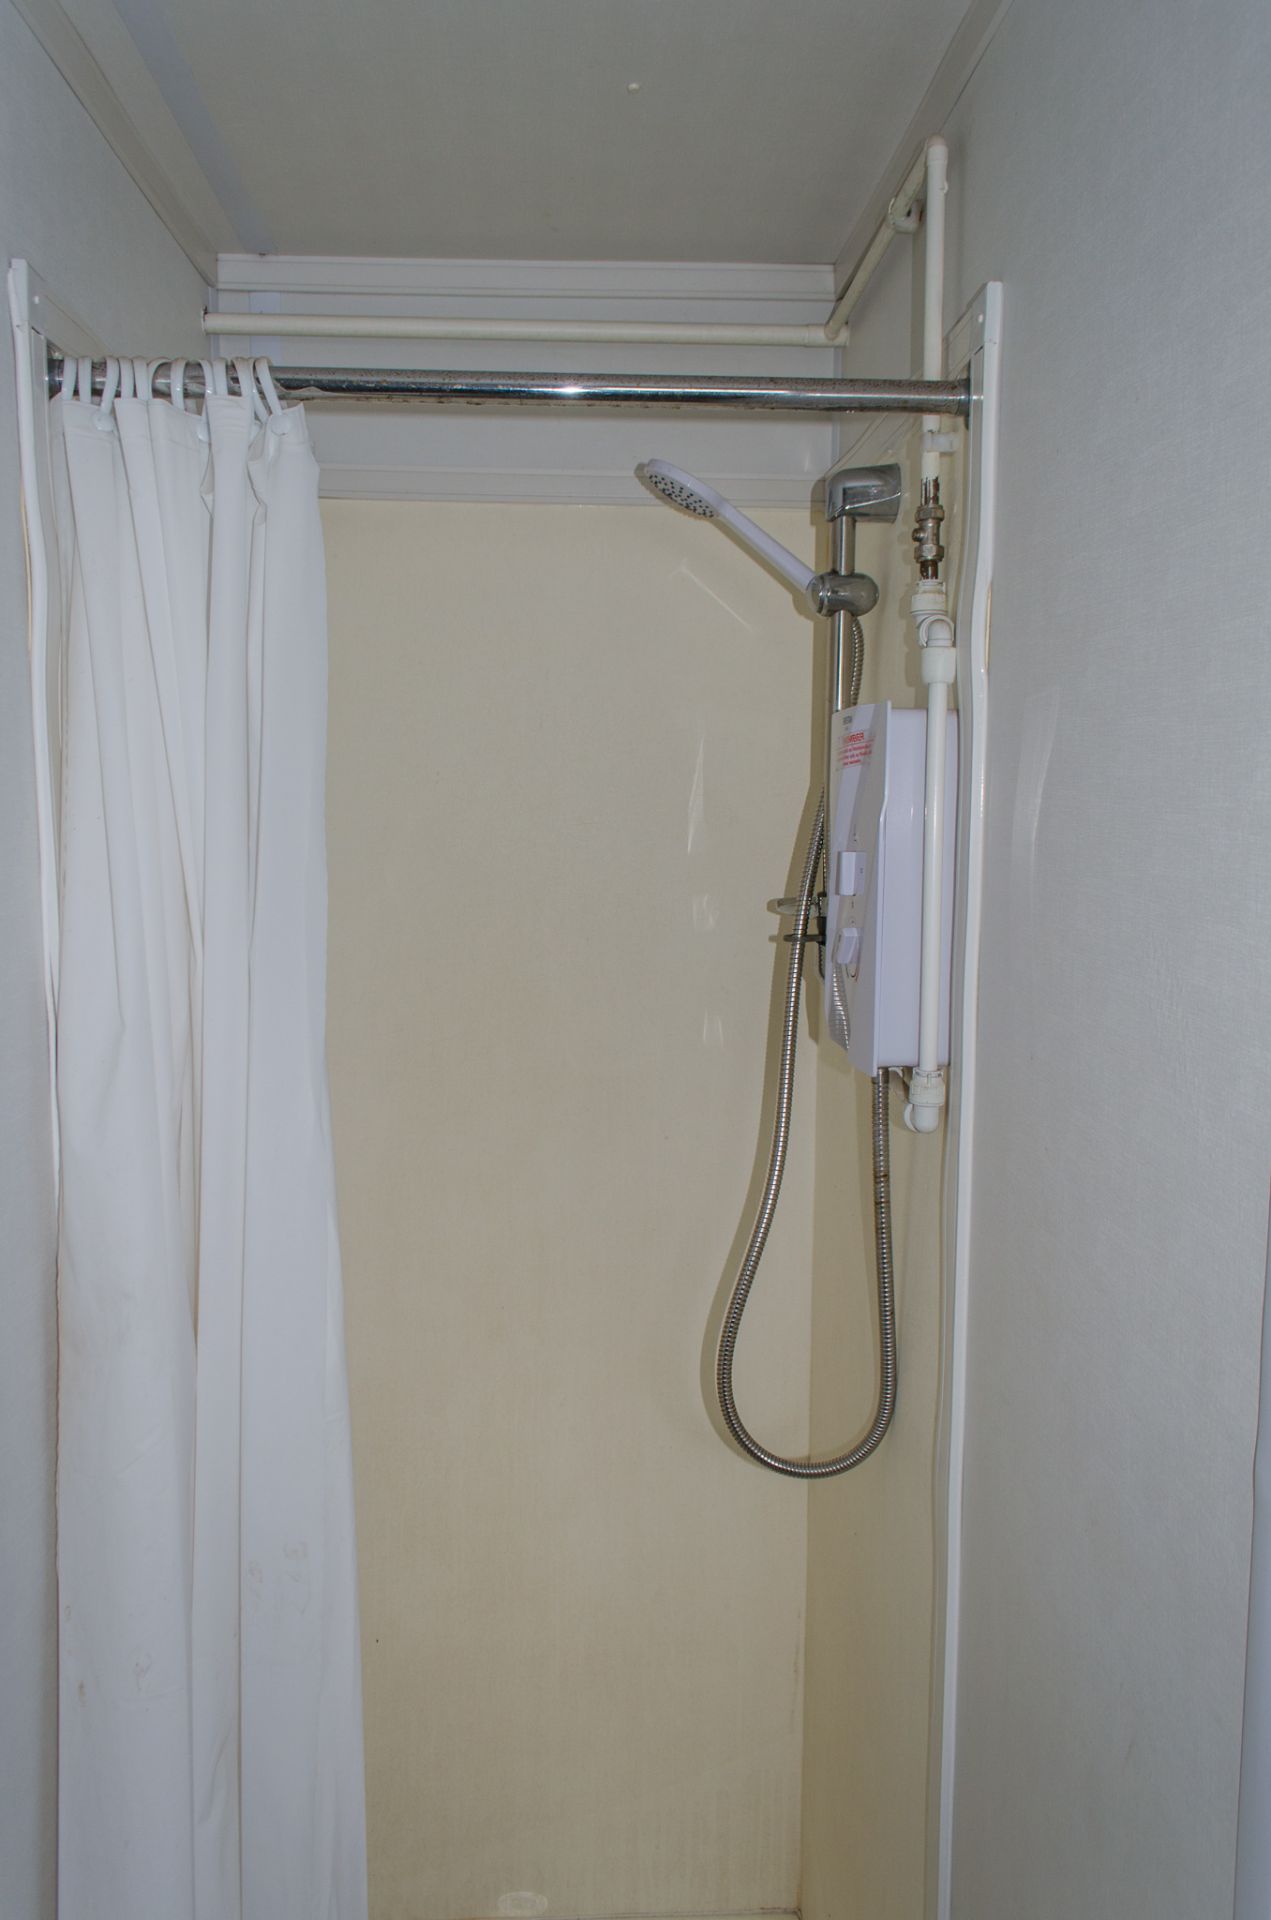 32 ft x 10 ft steel jack leg shower site unit Comprising of 8 - showers & changing area BBA1684 - Image 12 of 14